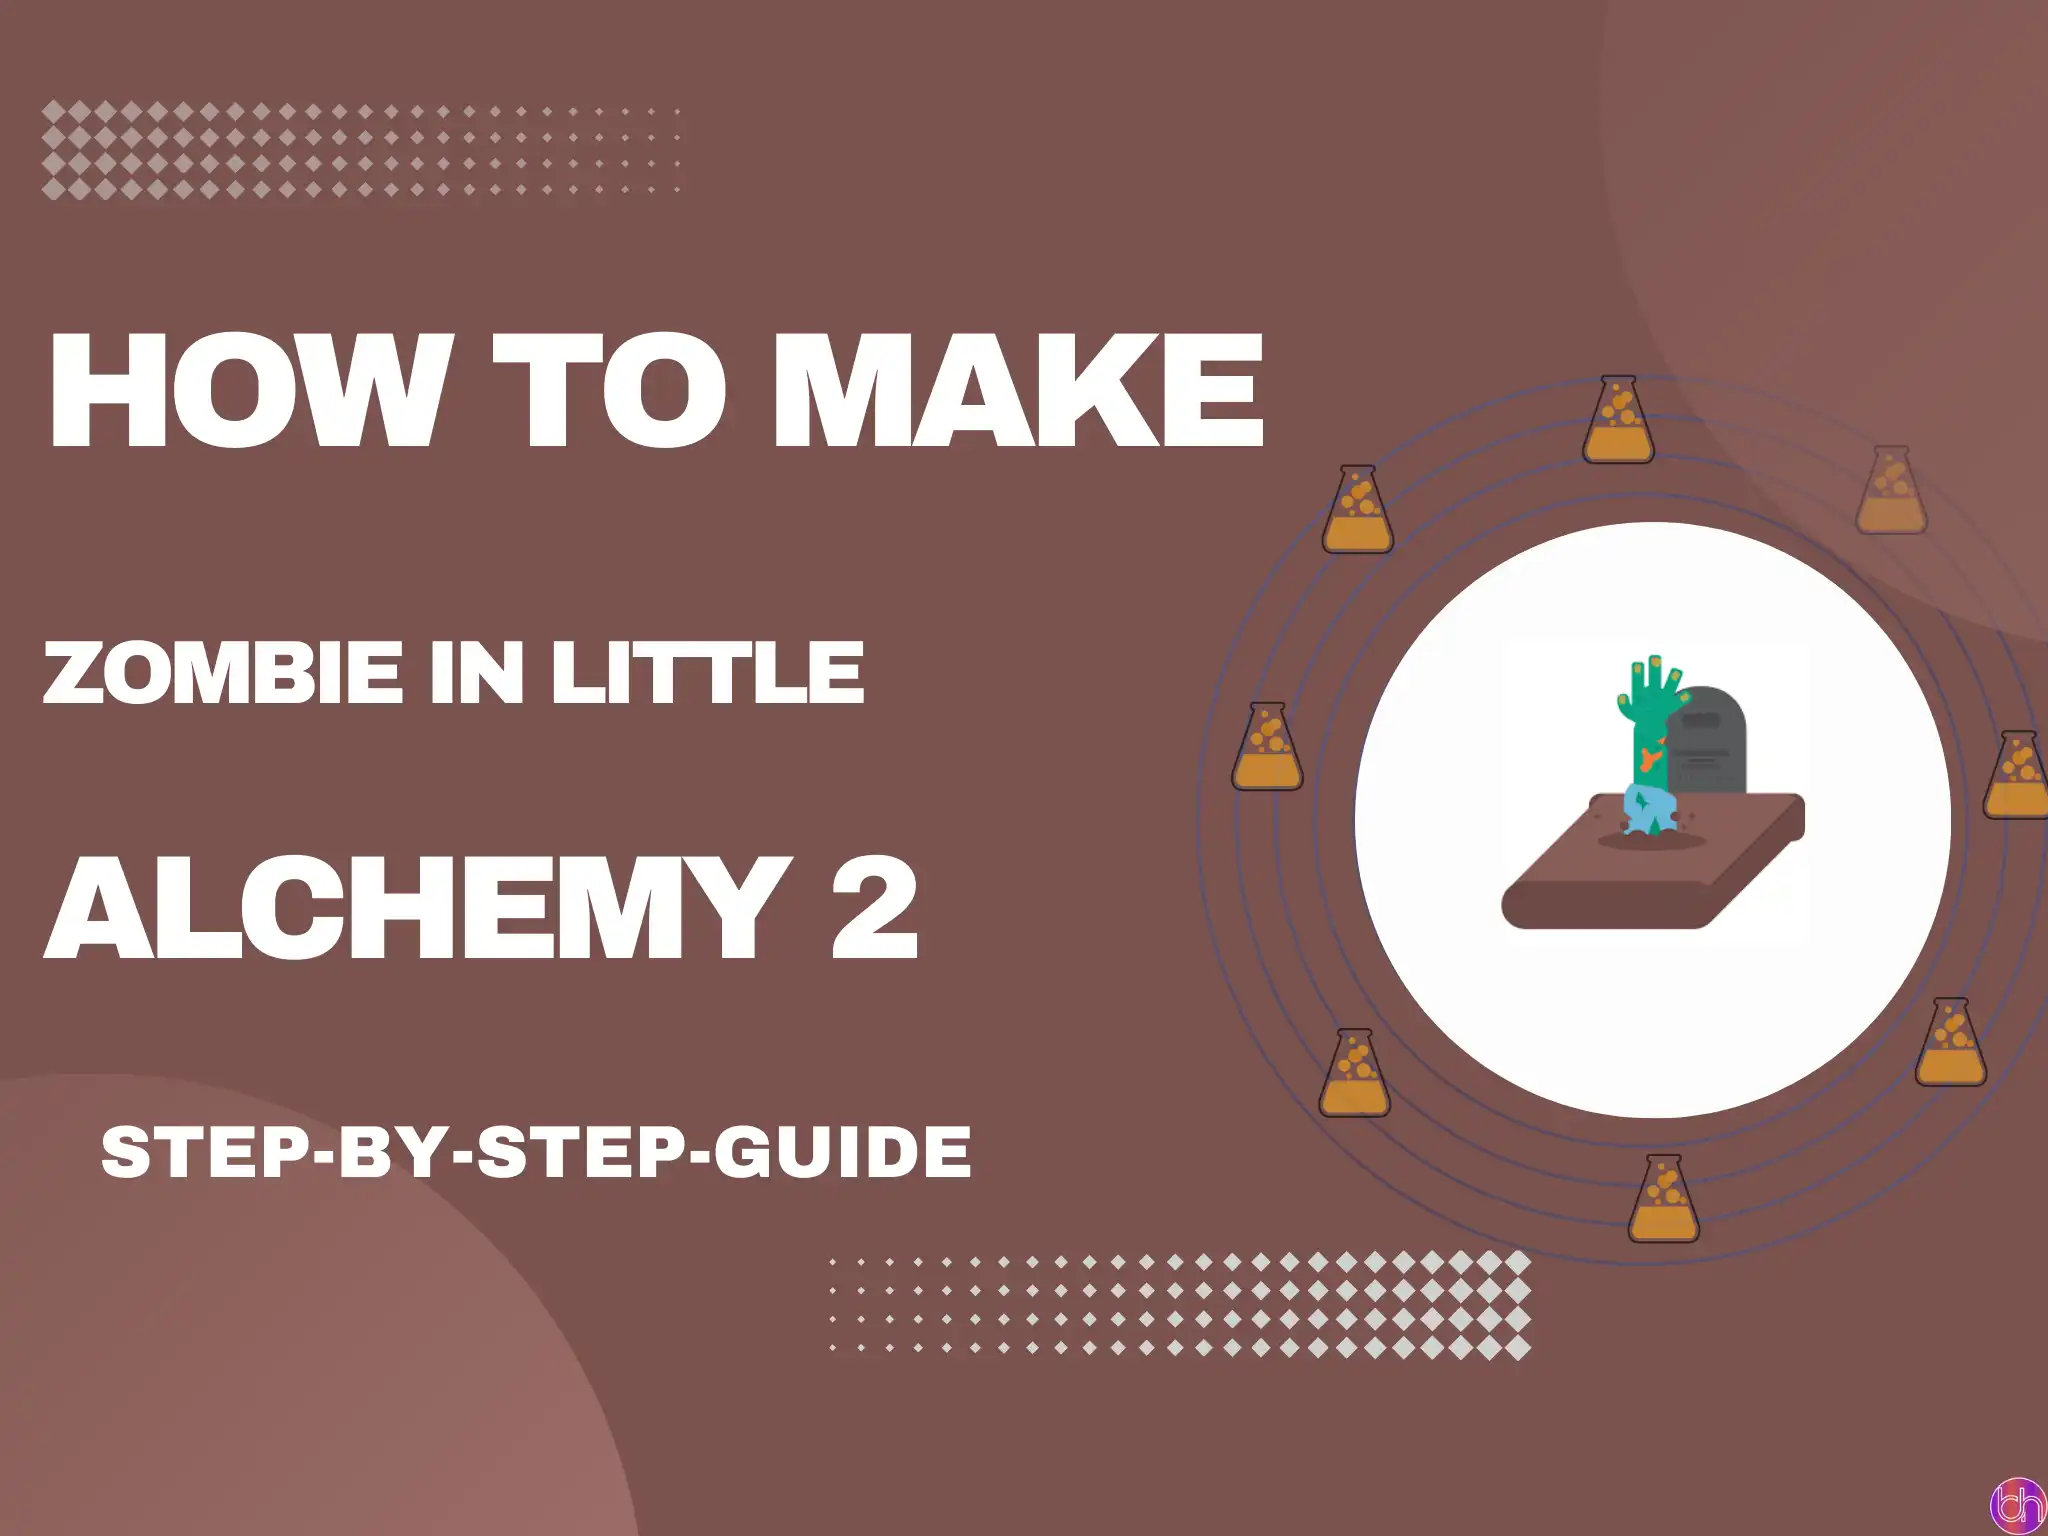 How to make Zombie in little alchemy 2